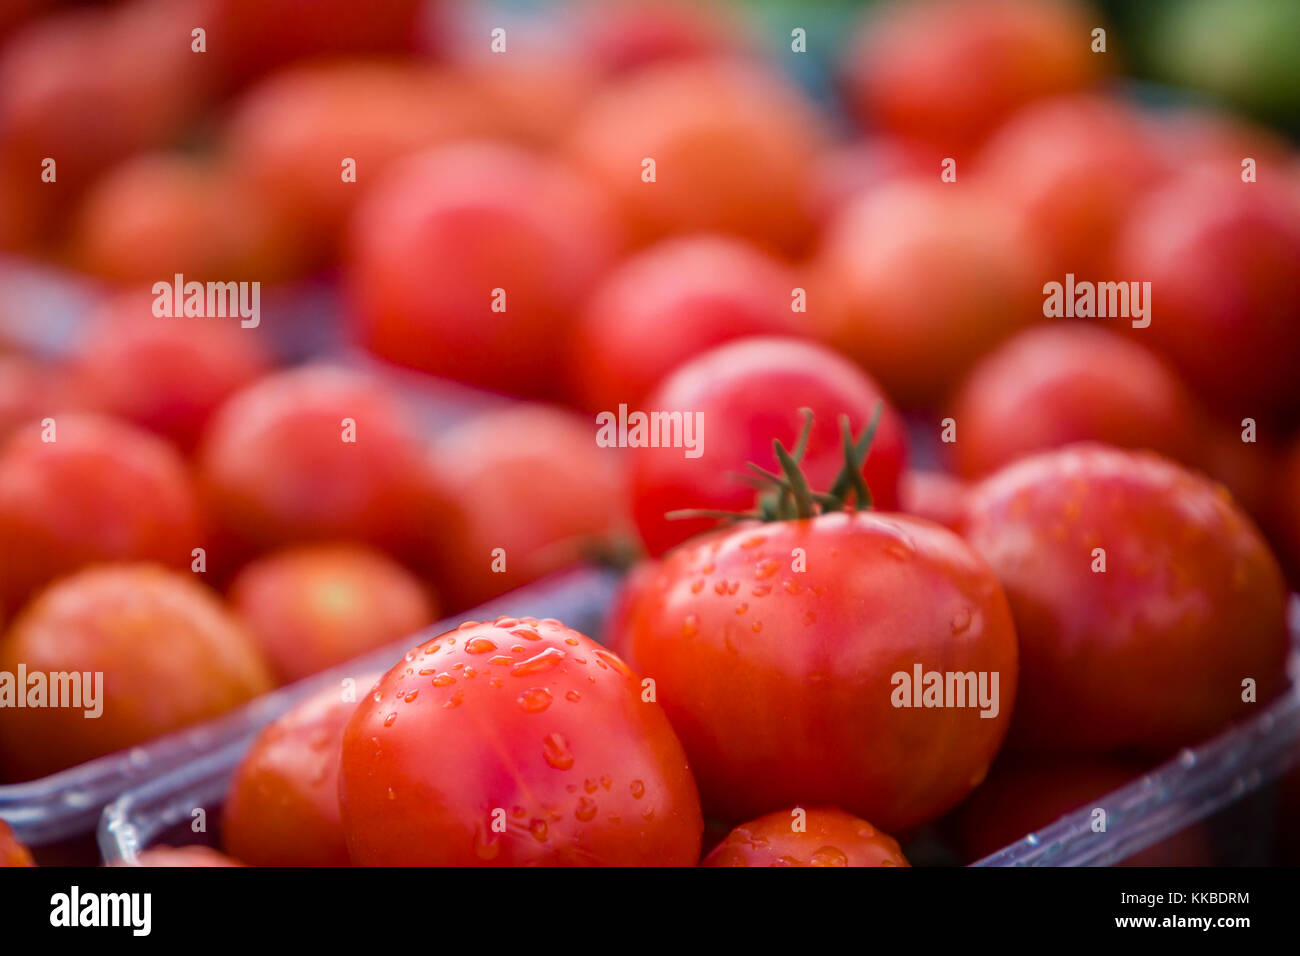 Farmers Market showing fresh field ripened tomatoes for sale. Stock Photo